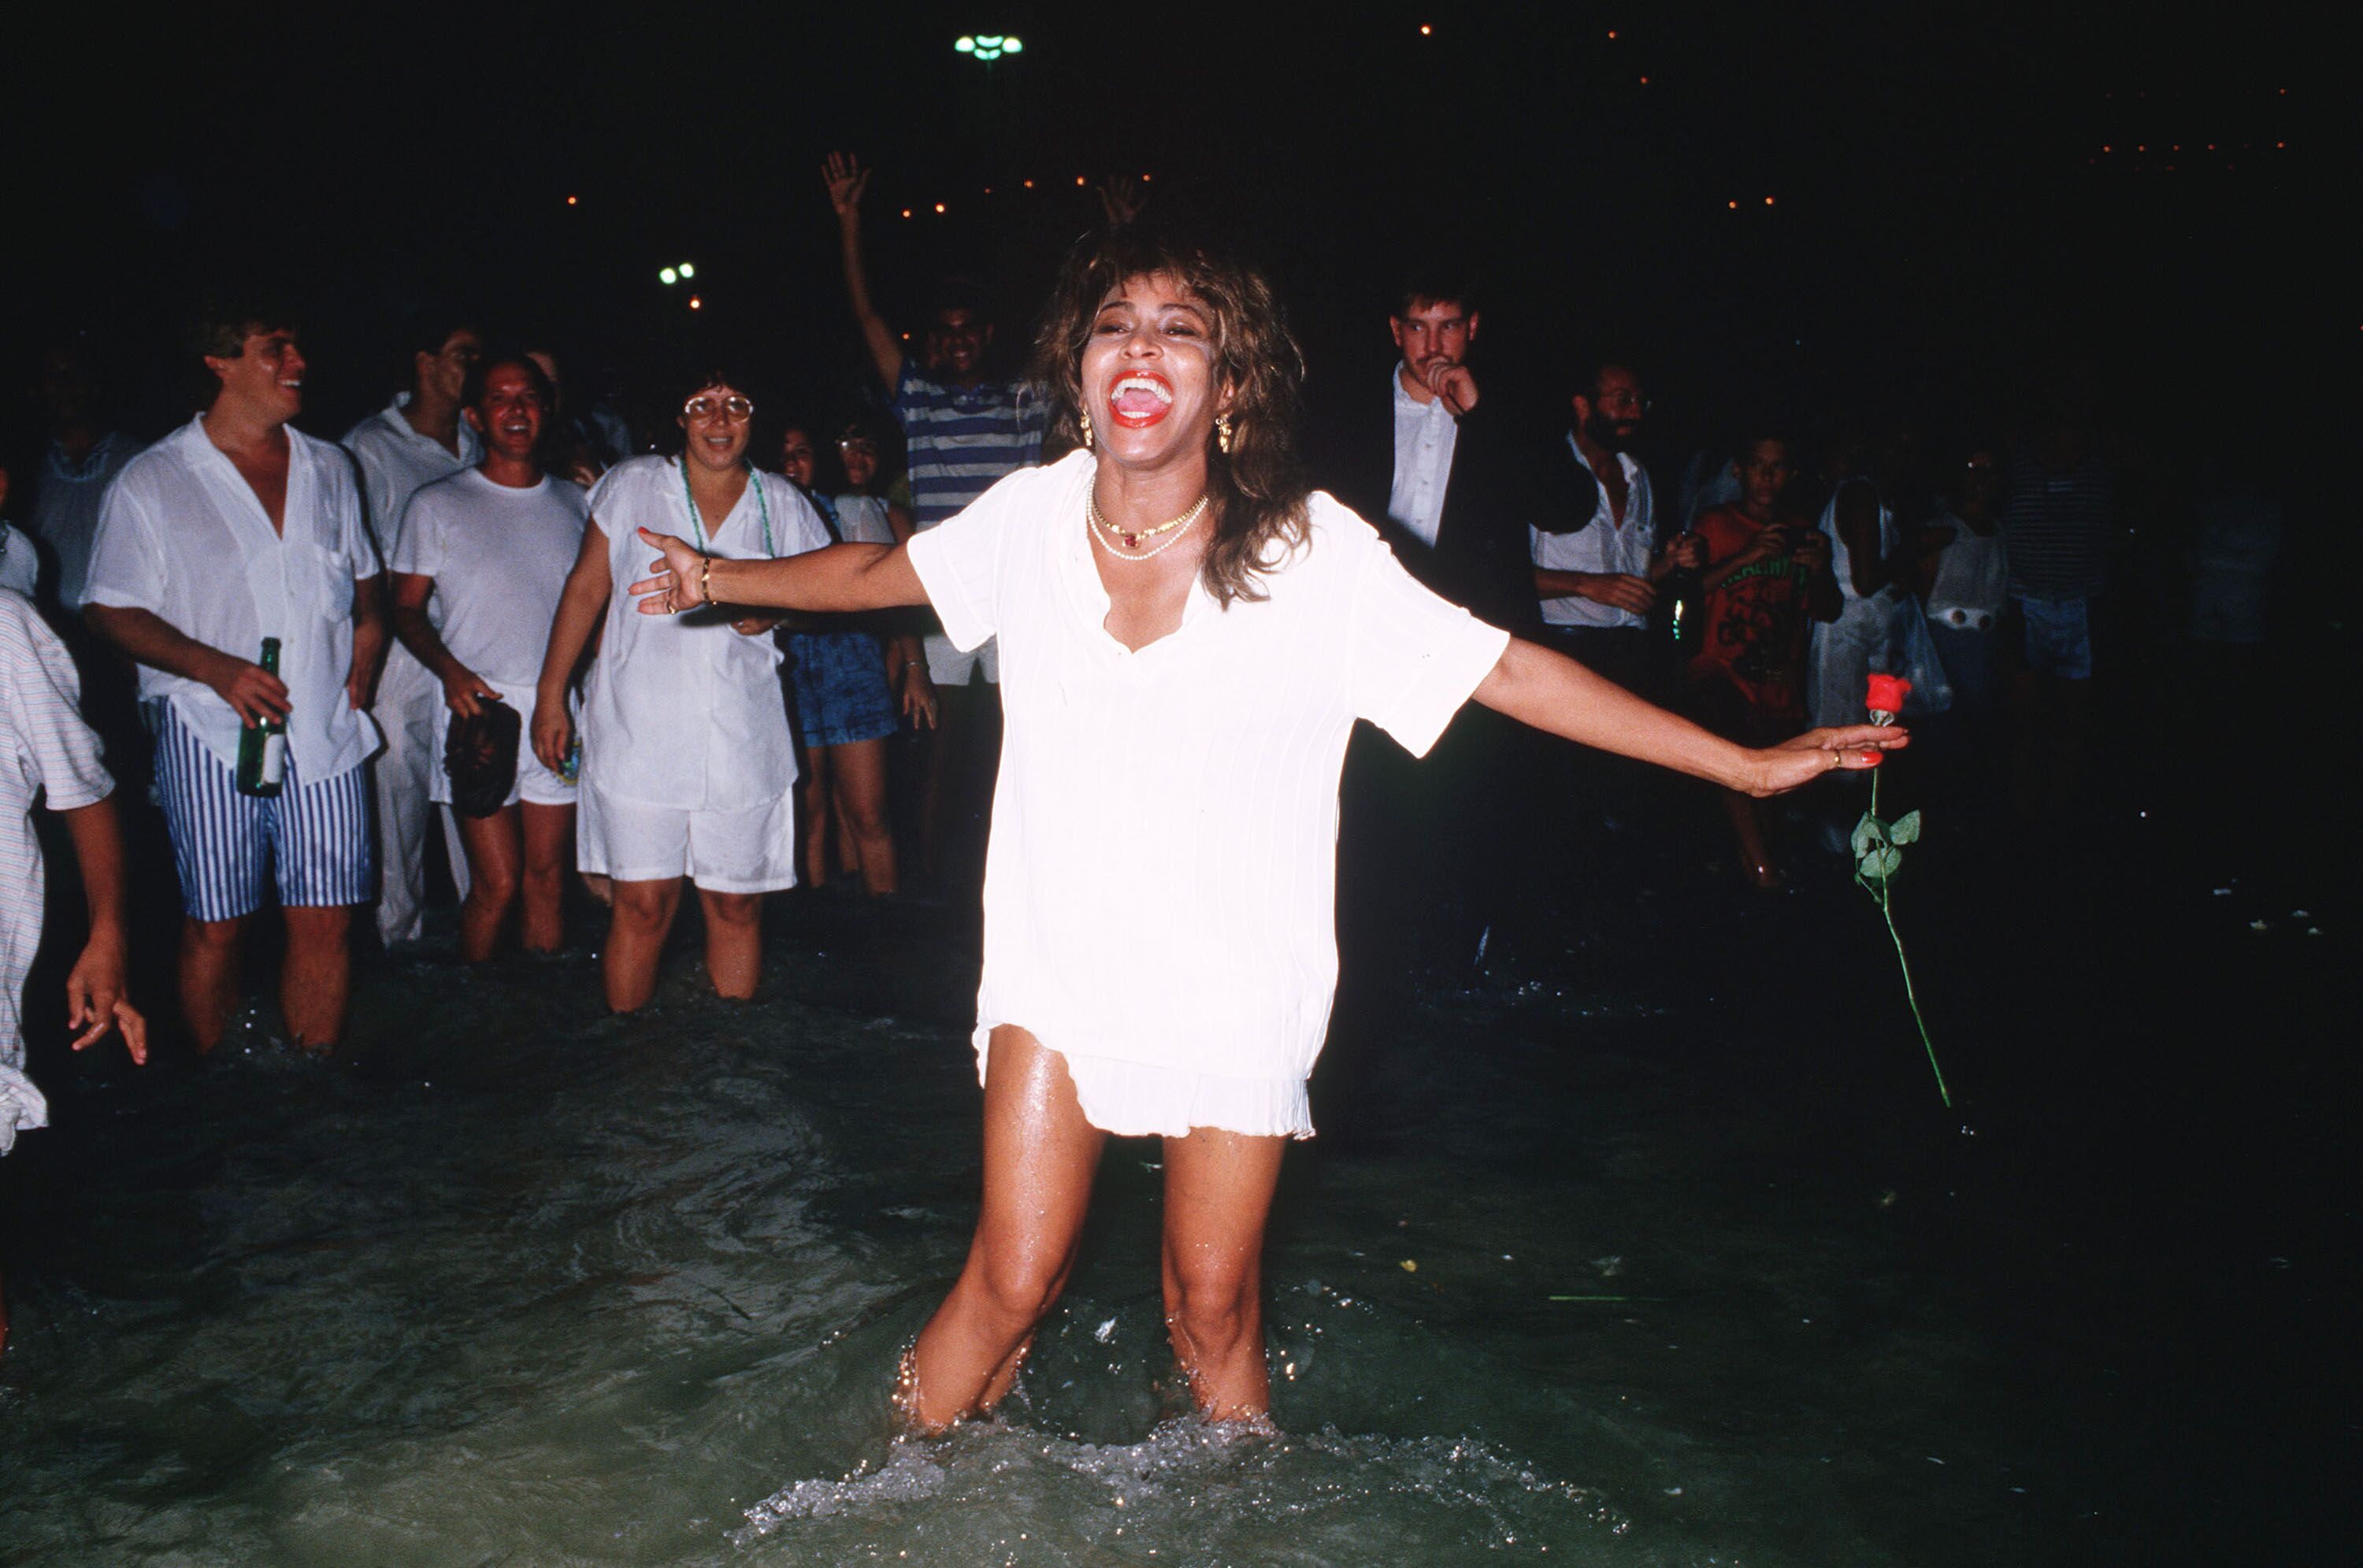 Tina Turner enjoying life as it is by the water | Source: Getty Images/GlobalImagesUkraine